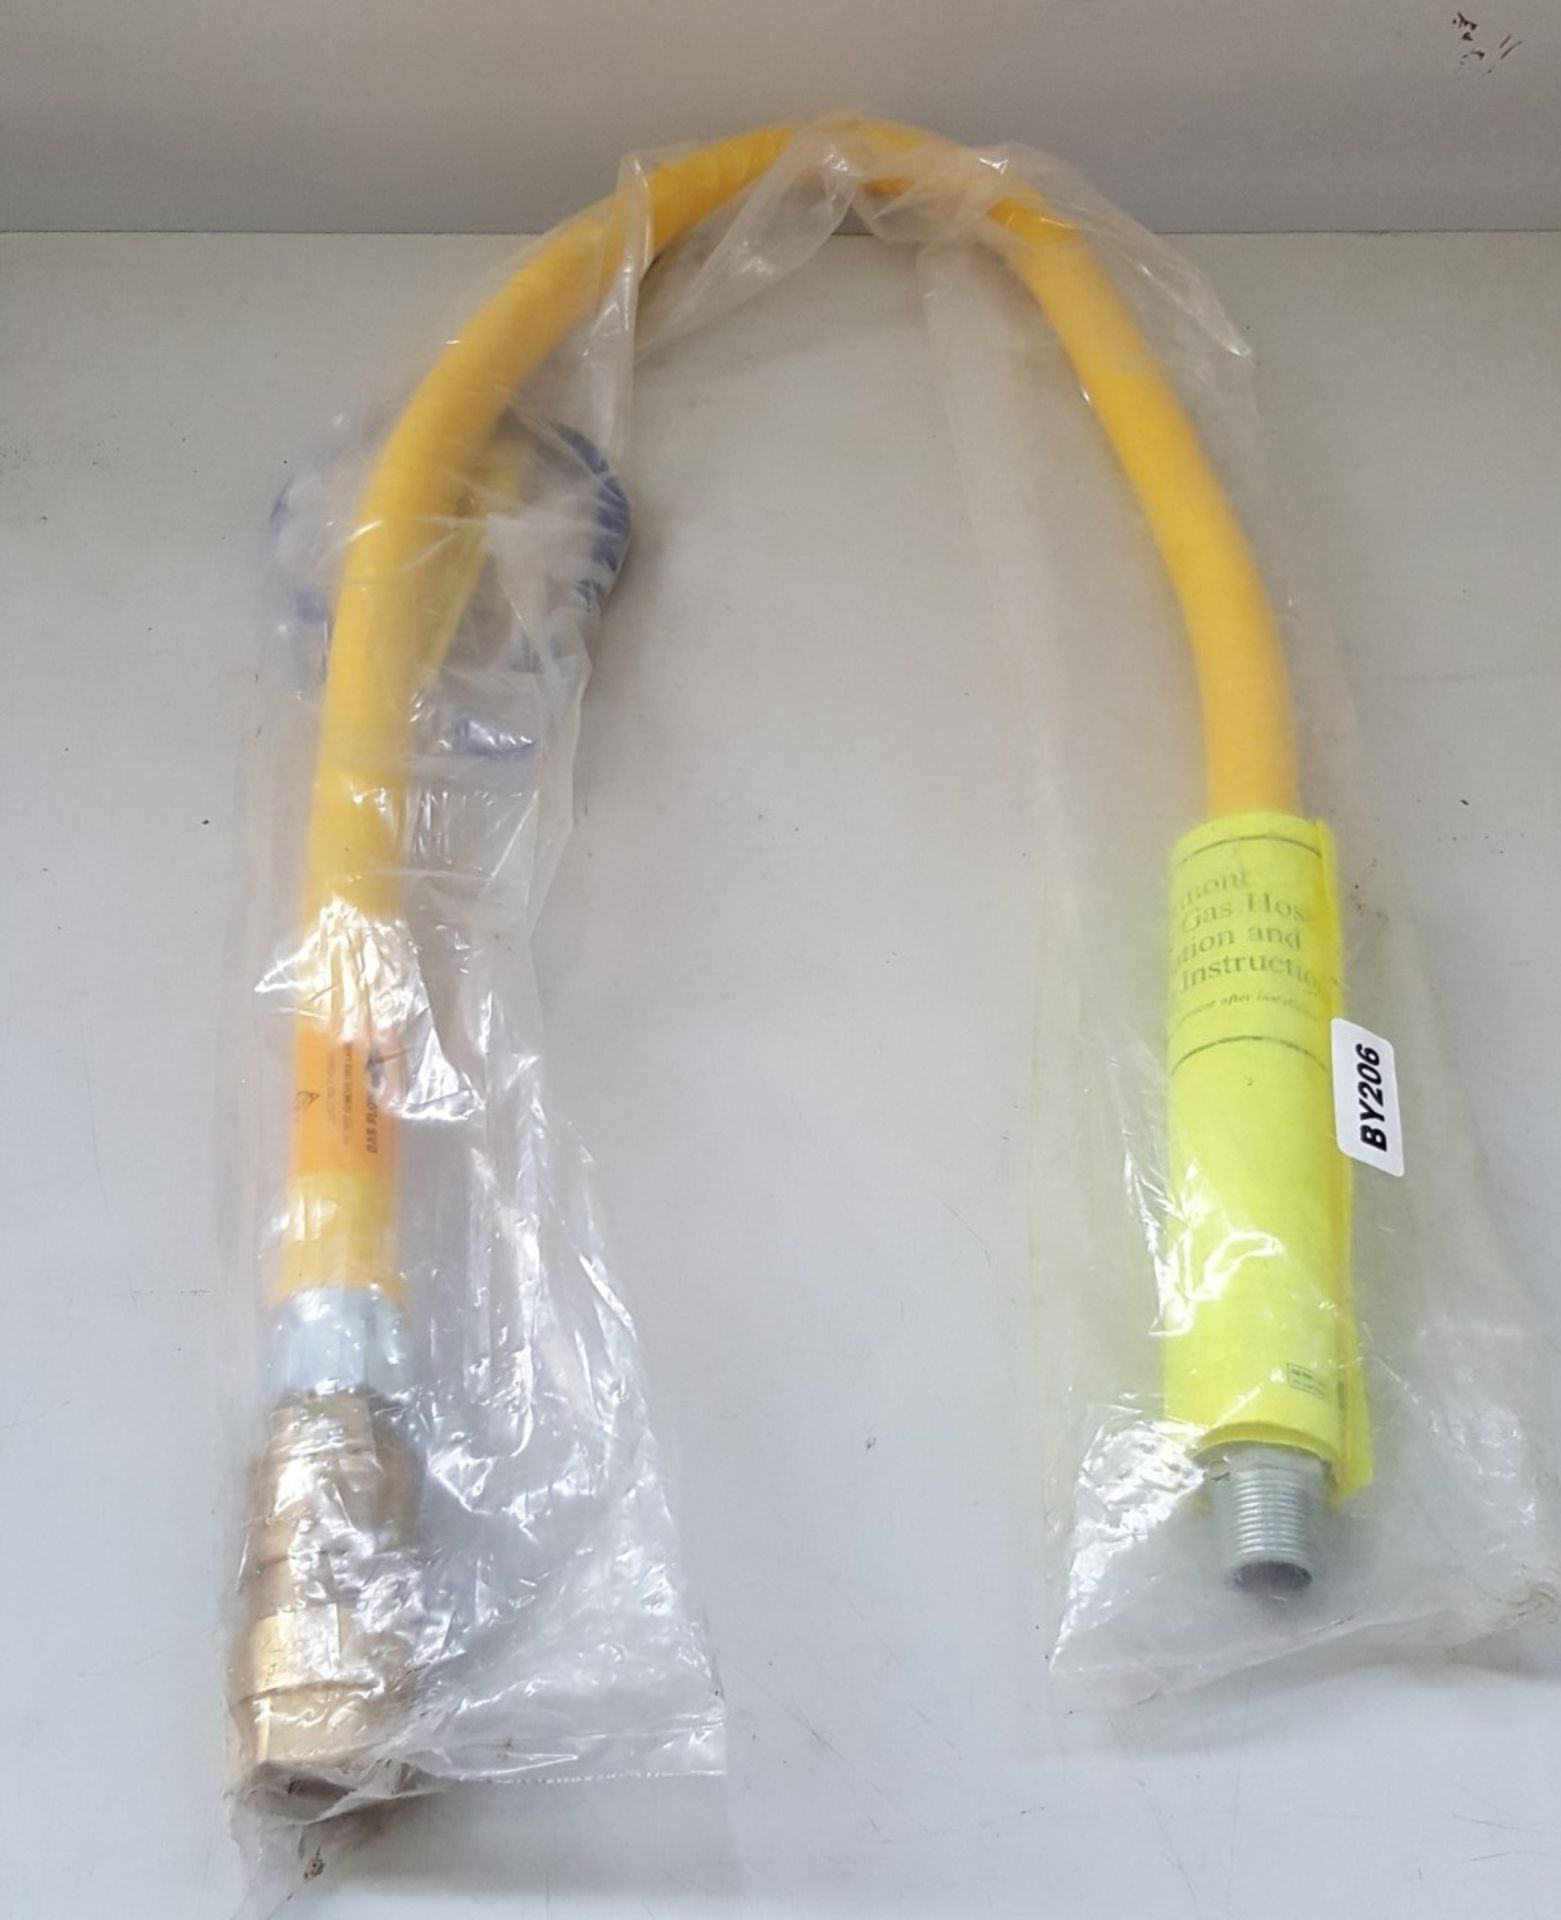 1 x NEW DORMONT BY MECHLINE 3/4 INCH YELLOW CATERING GAS HOSE 1M - Ref BY206 - Image 2 of 4